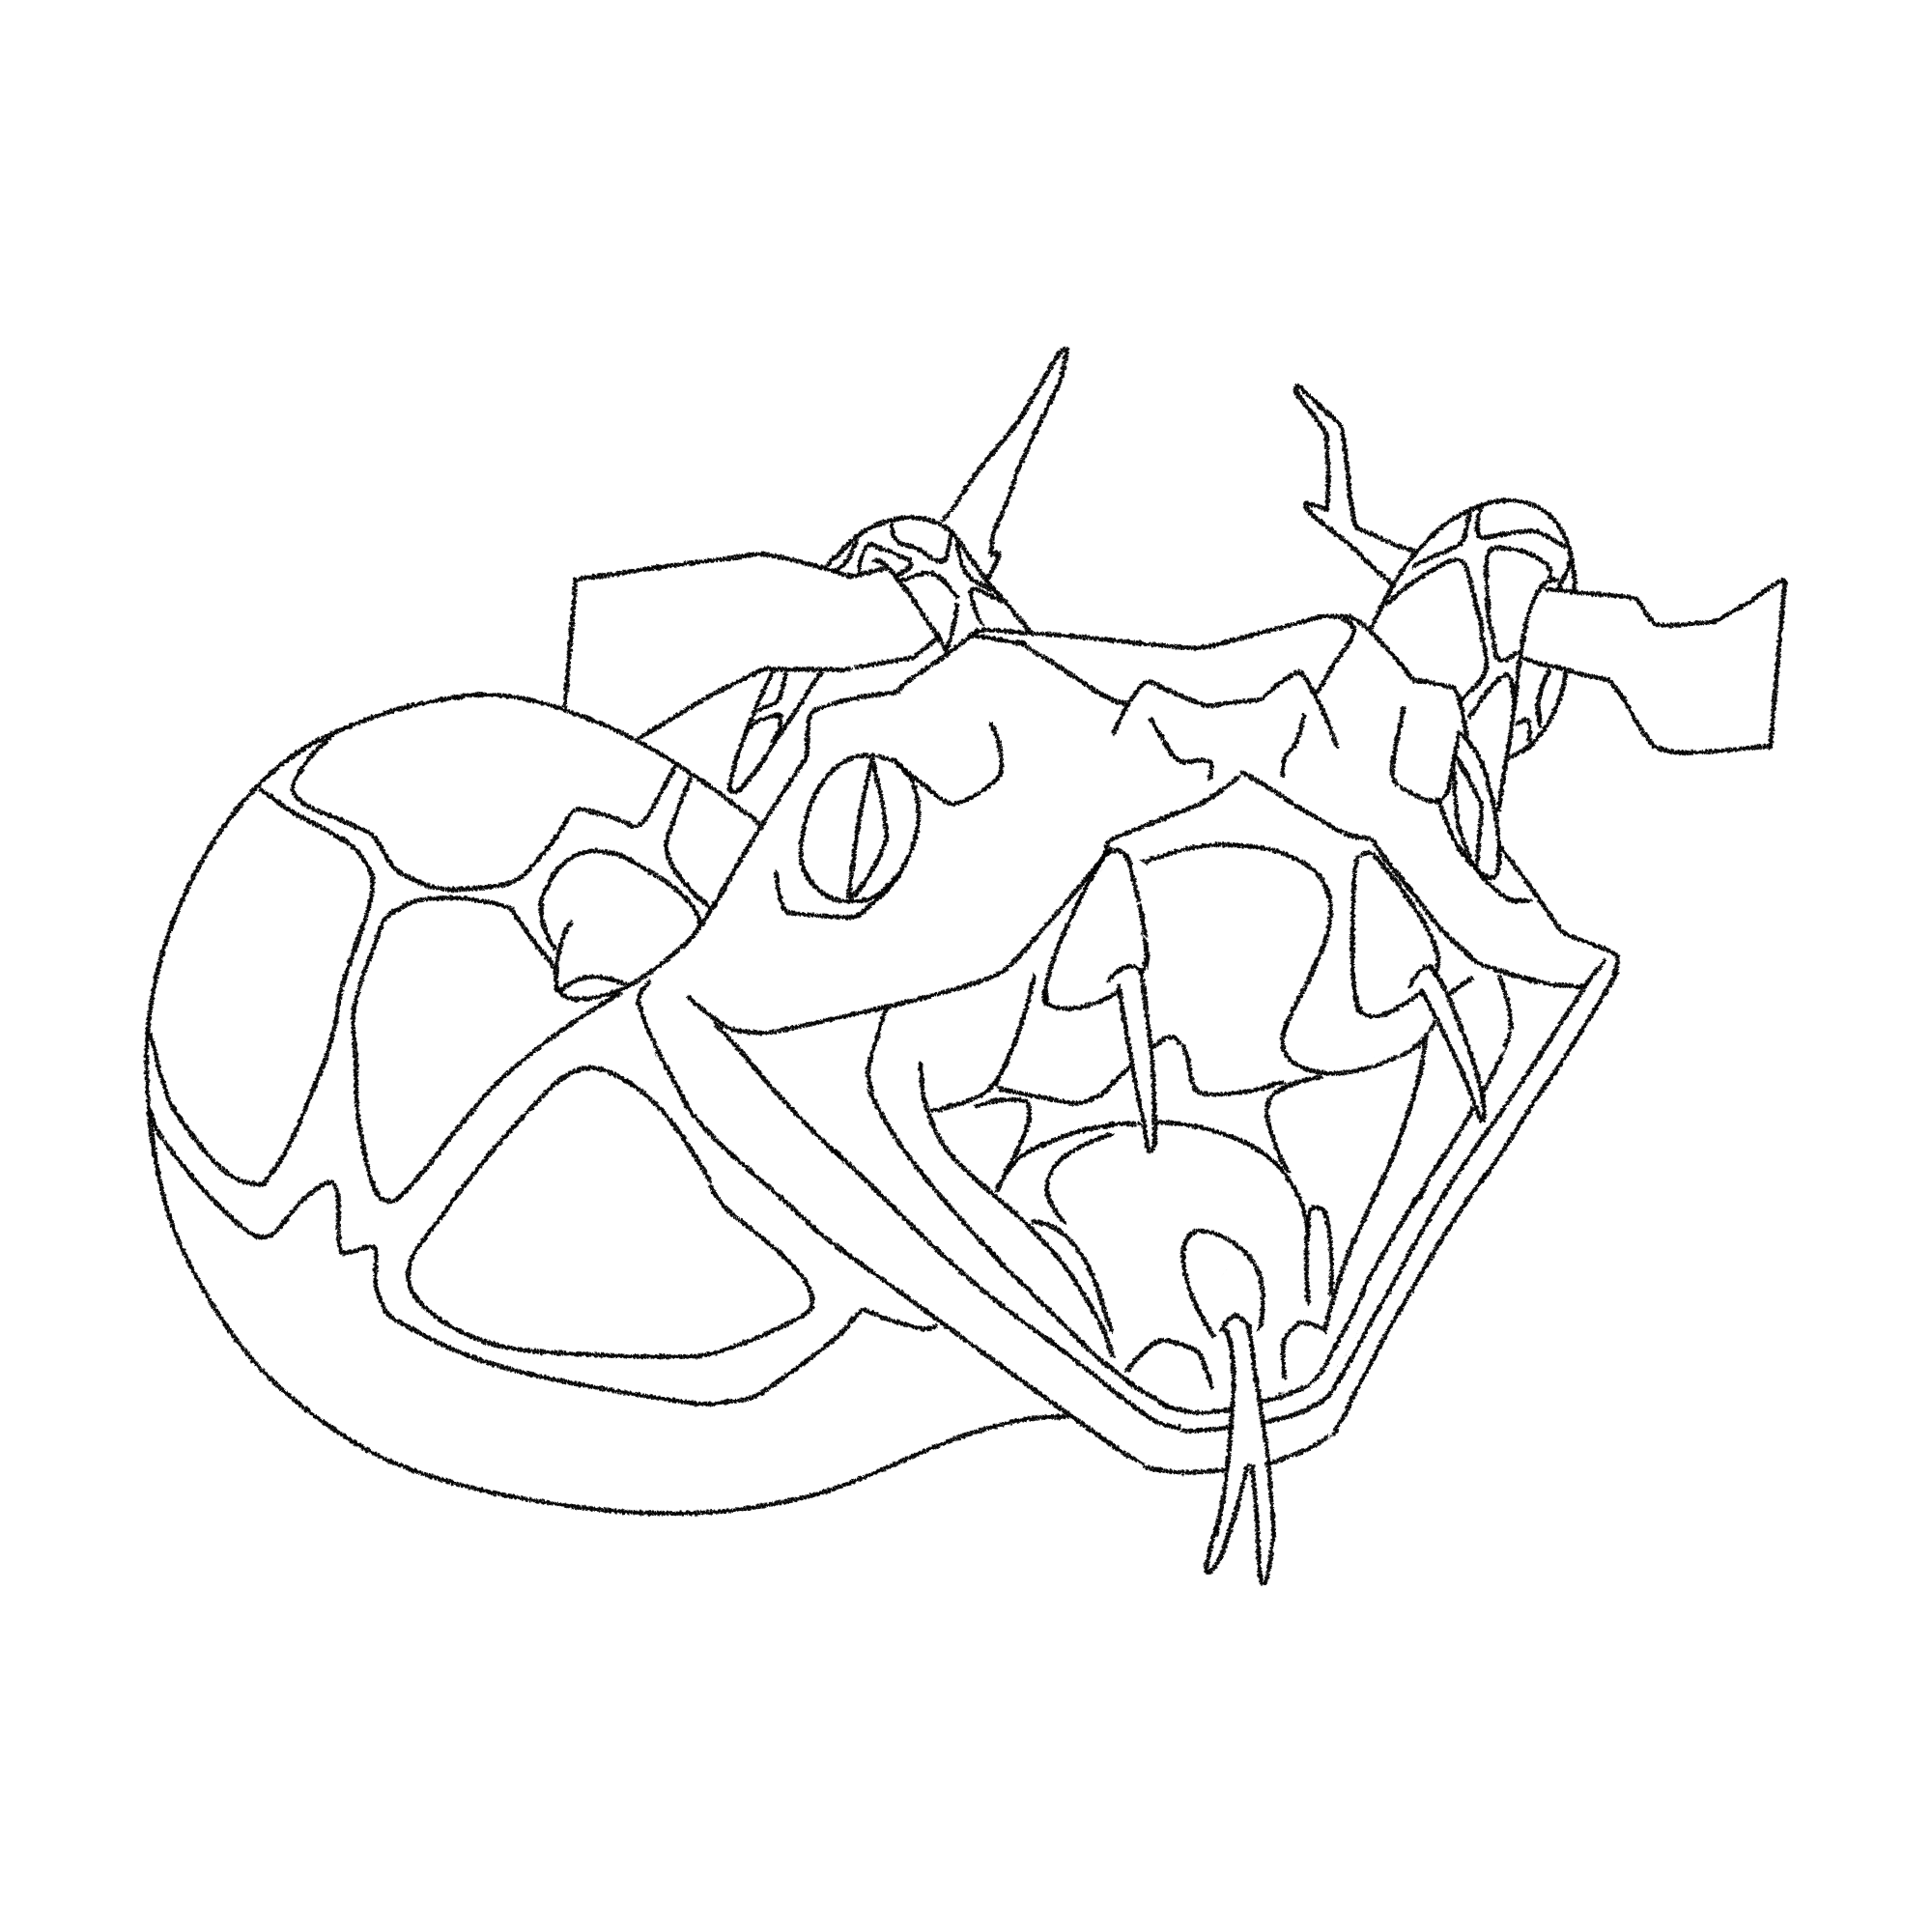 A Snake colouring outline